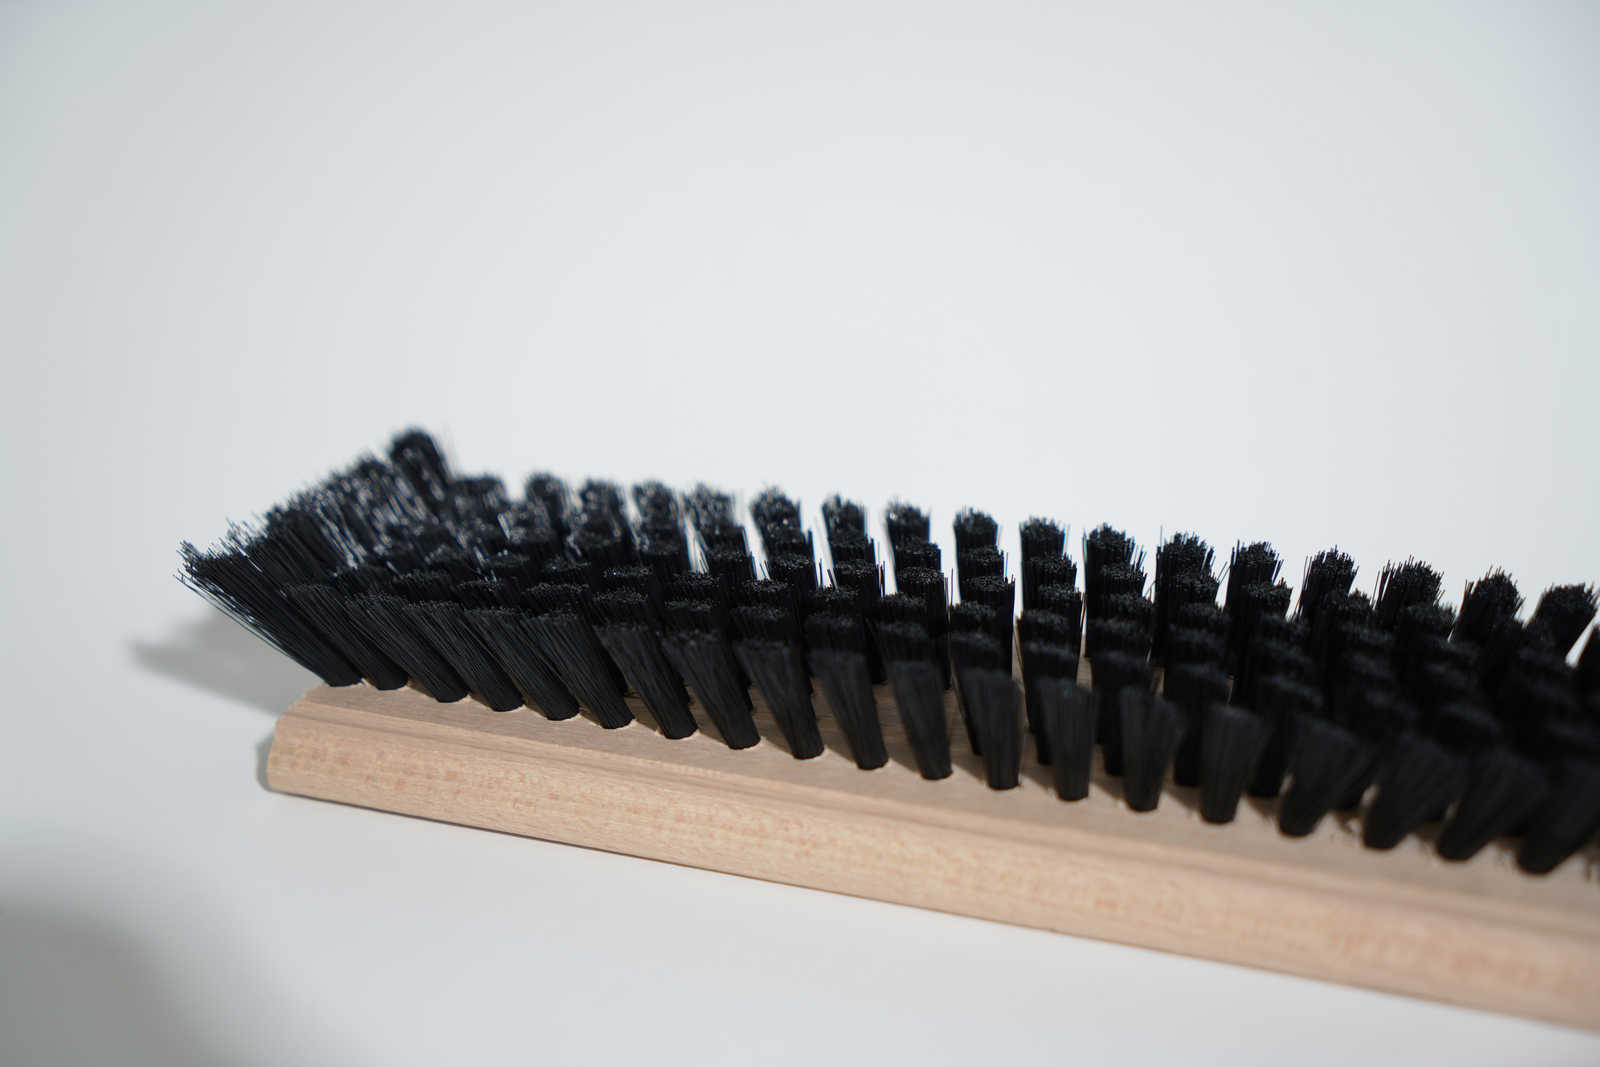             Wallpaper brush 23,5cm x 6cm wood with synthetic bristles
        